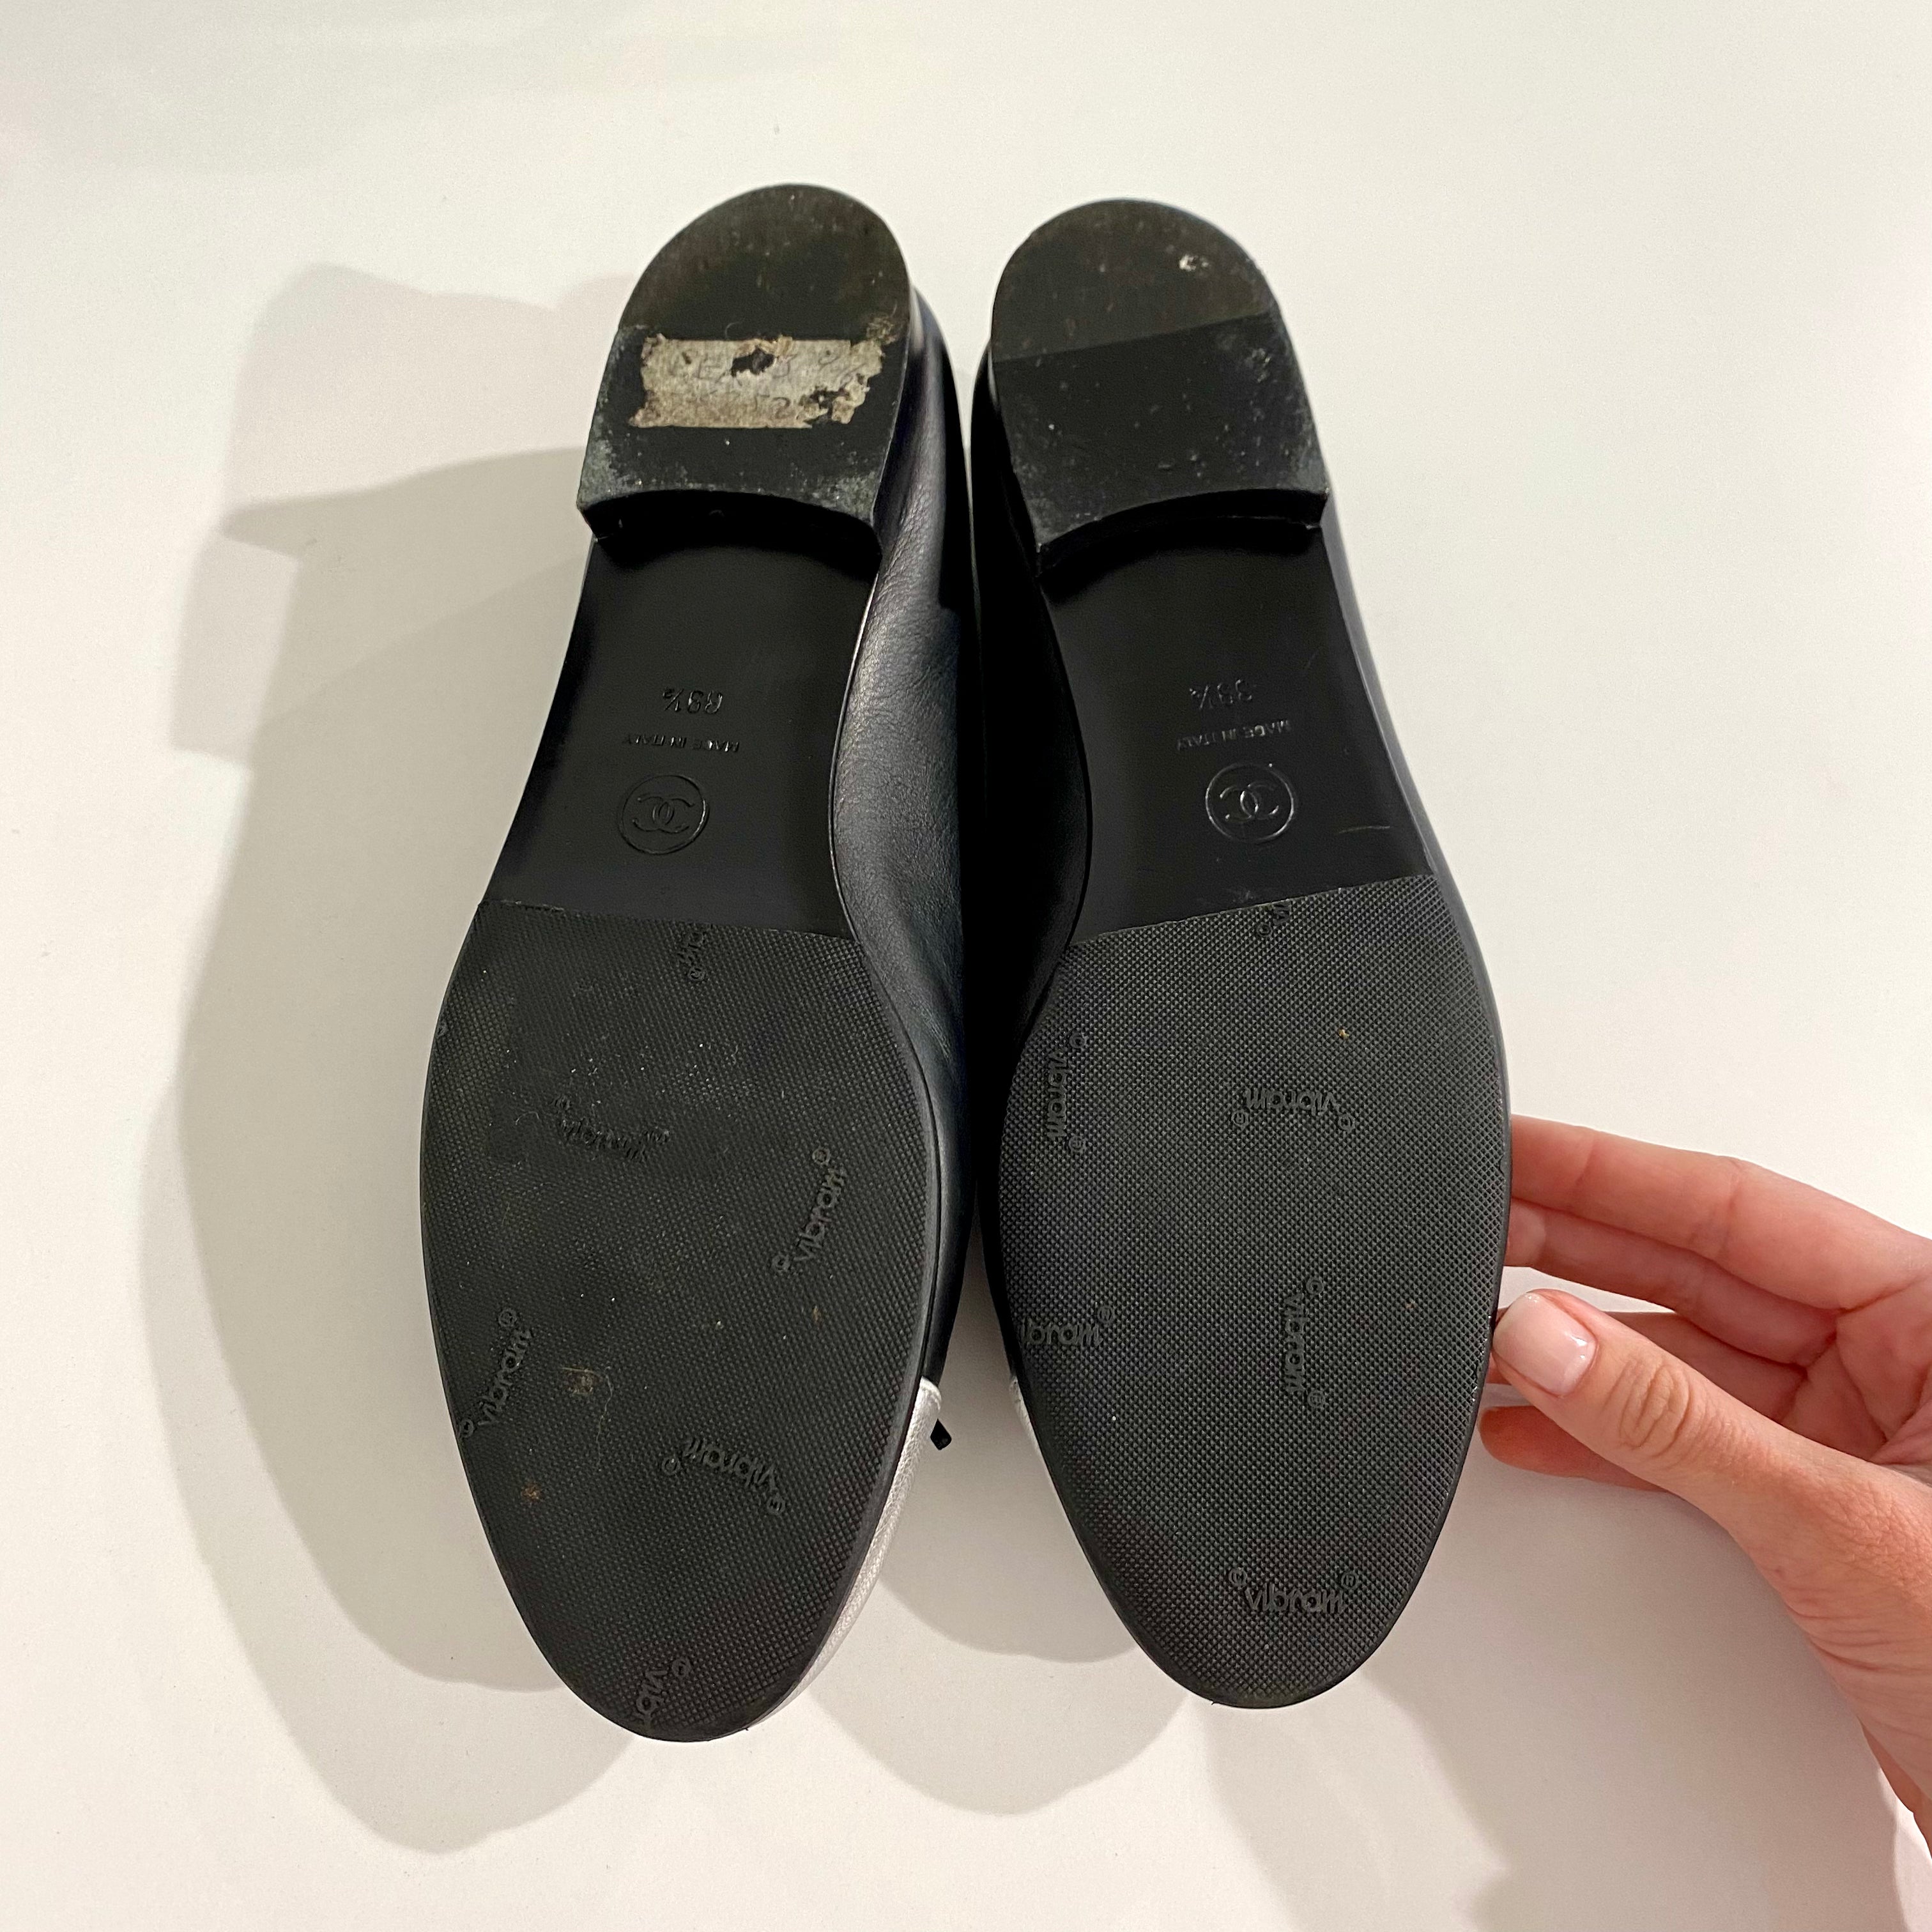 NOT FOR SALE Chanel Cambon flats  Chanel, Black ballet flats, Chanel  boutique